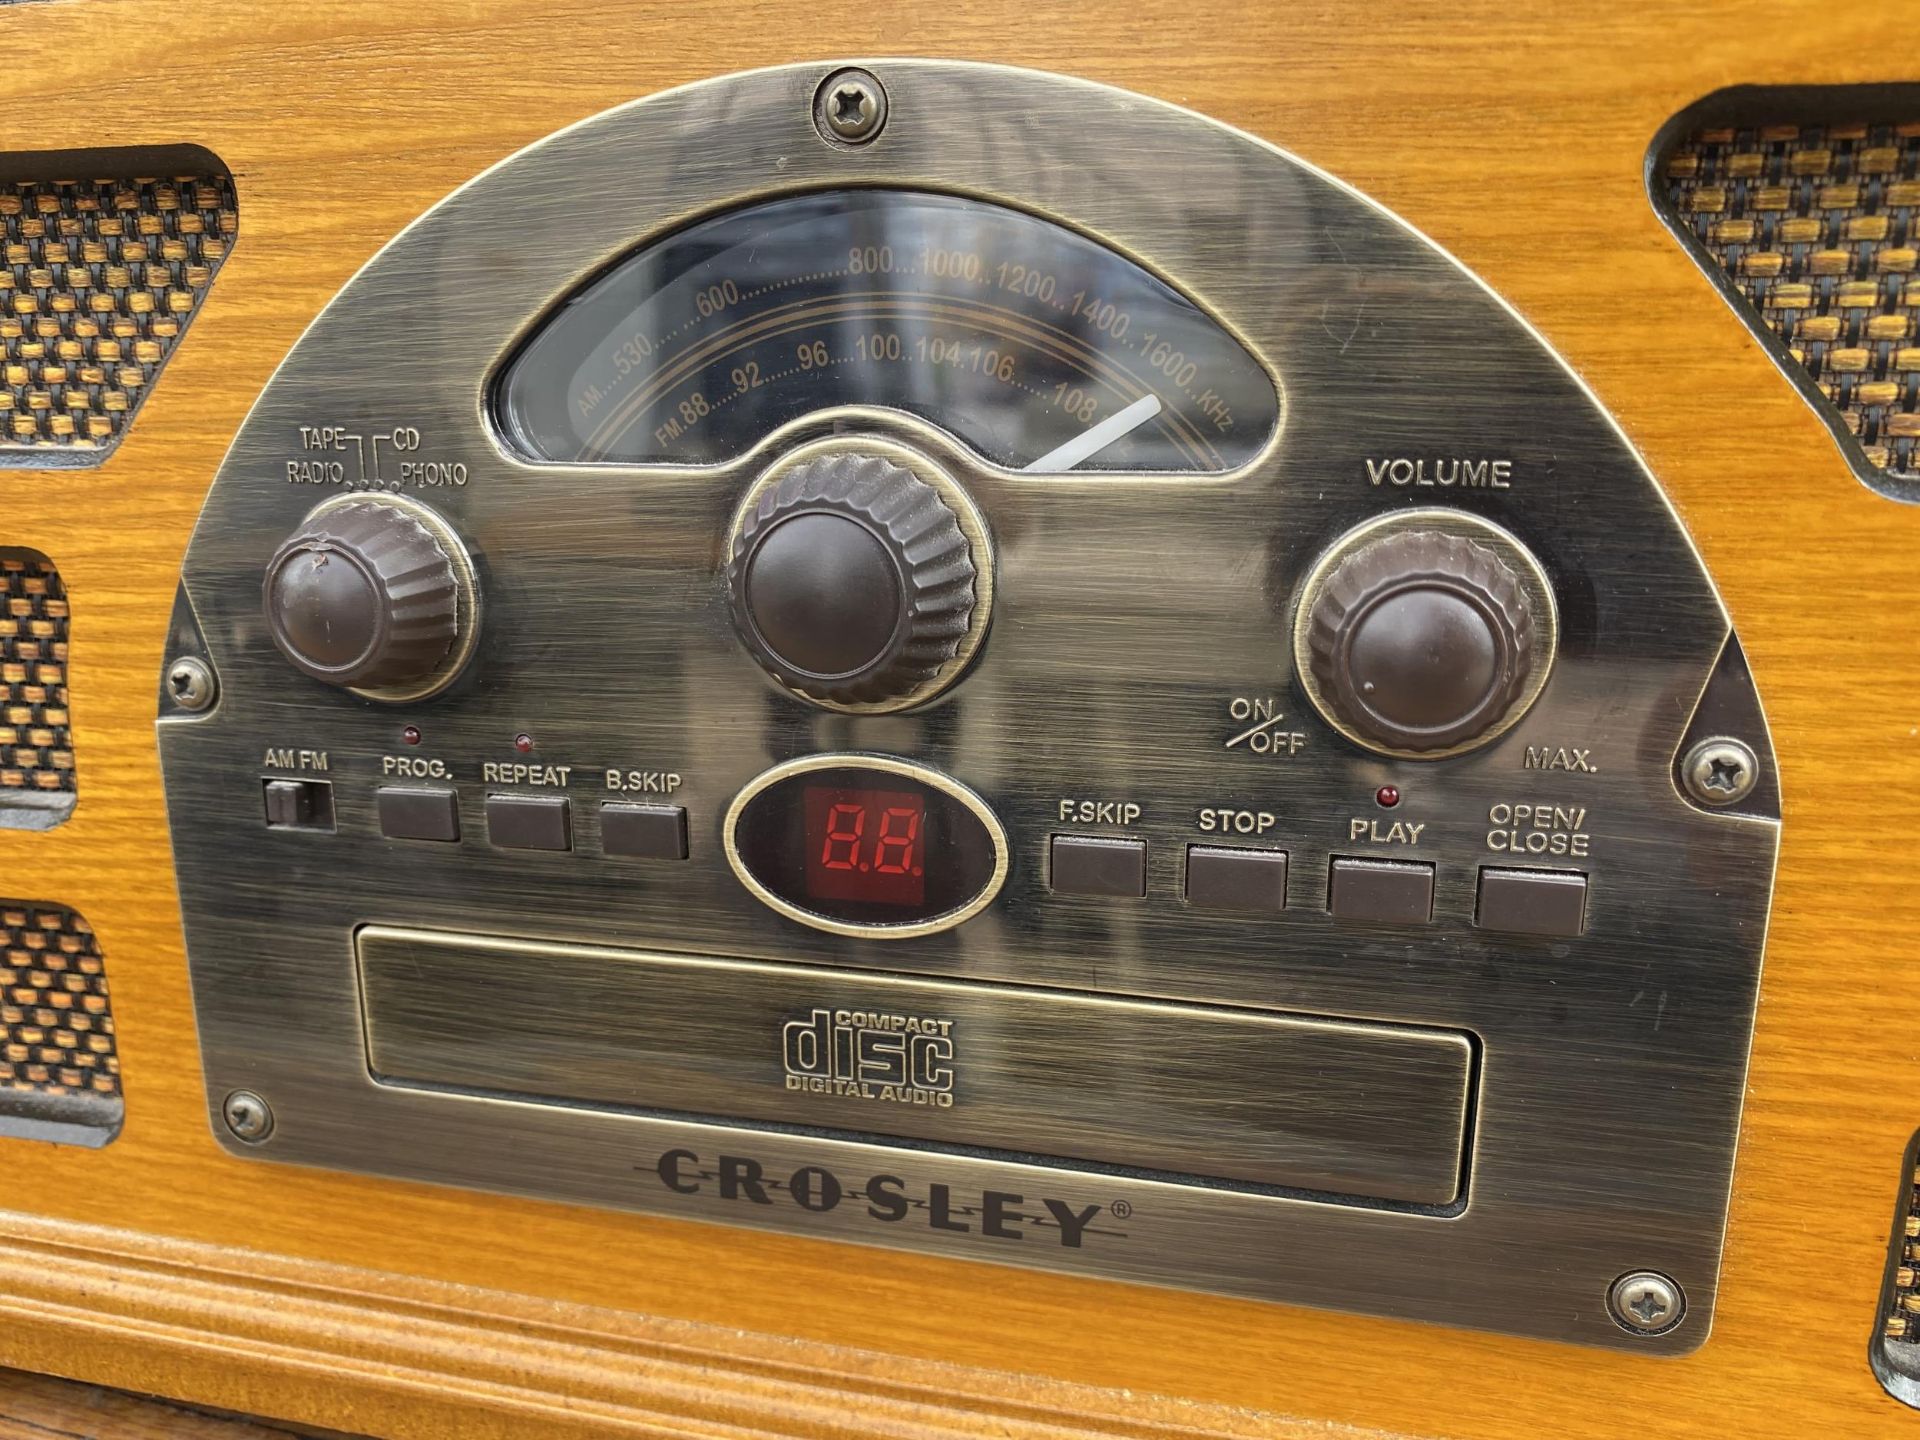 A CROSLEY RECORD PLAYER WITH WOODEN CASING - Image 3 of 4